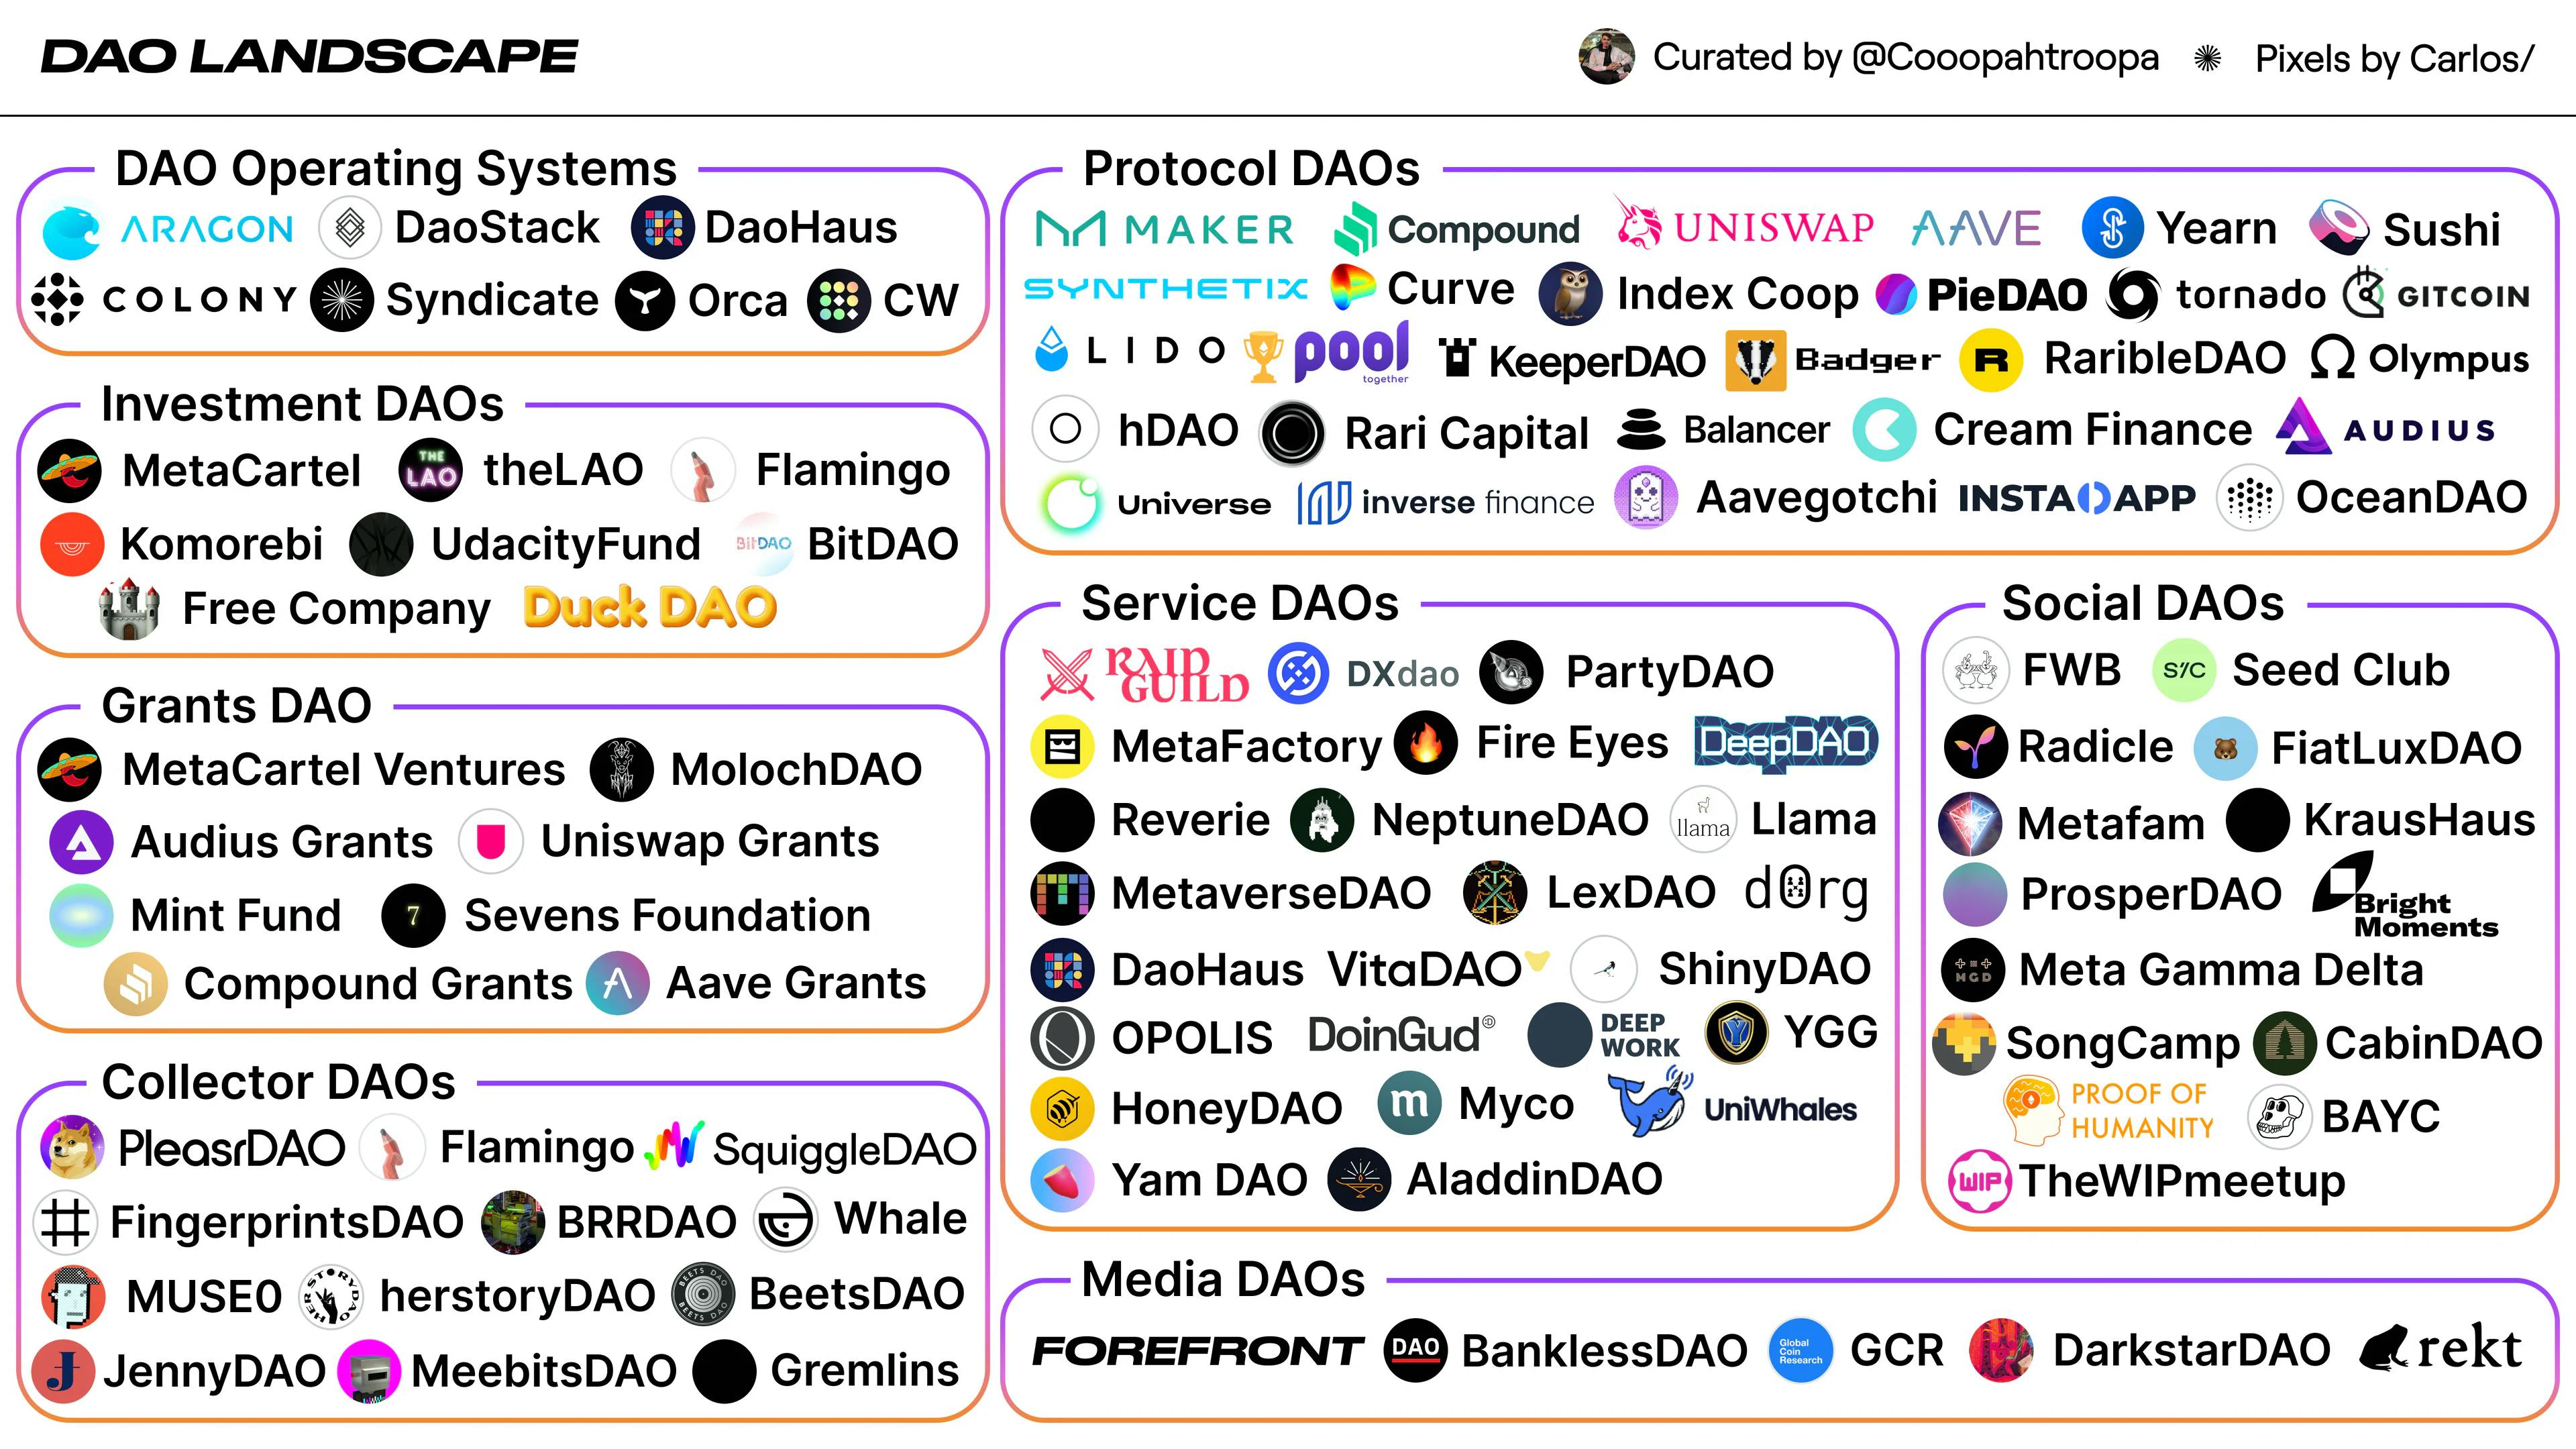 Image of the DAO landscape. It is divided into eight boxes, each of which represents a different type of DAO. Types: DAO Operating Systems, Investment DAOs, Grants DAO, Collector DAO, Media DAOs, Service DAOs, Social DAOs and Protocol DAOs. The boxes for Service DAOs and Protocol DAOs are the biggest.